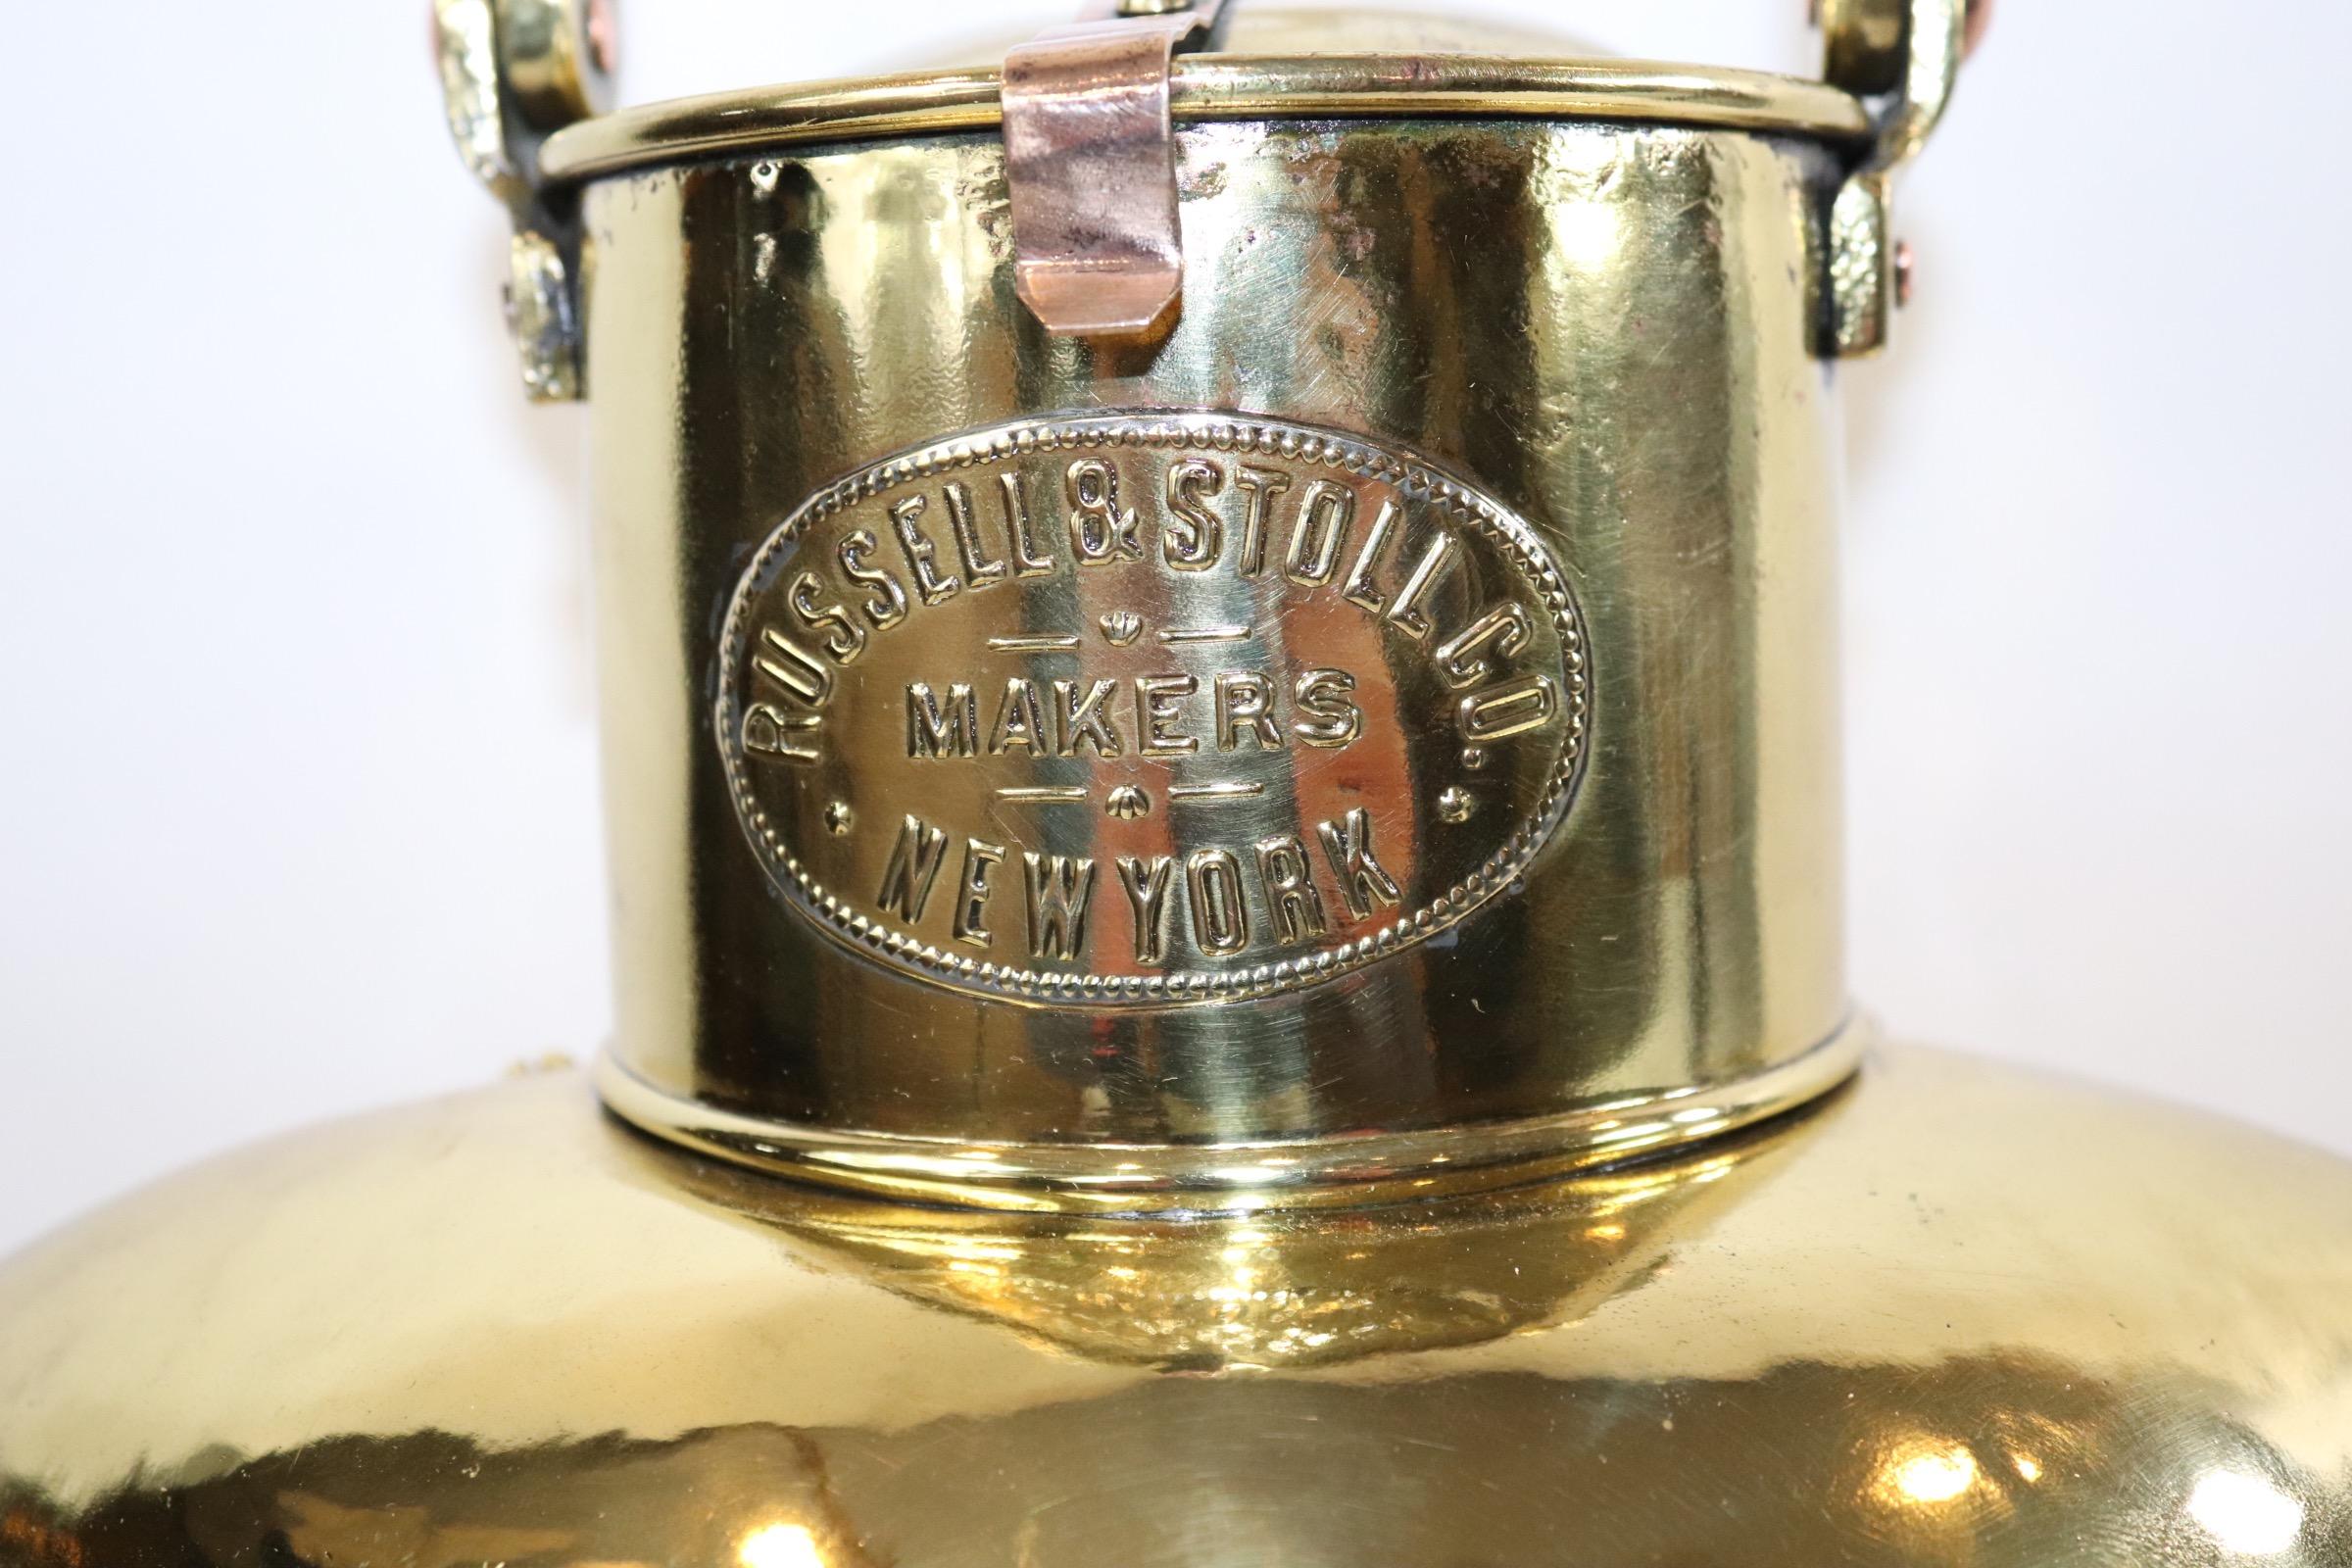 Highly polished and lacquered ships port lantern with brass makers badge with makers name 